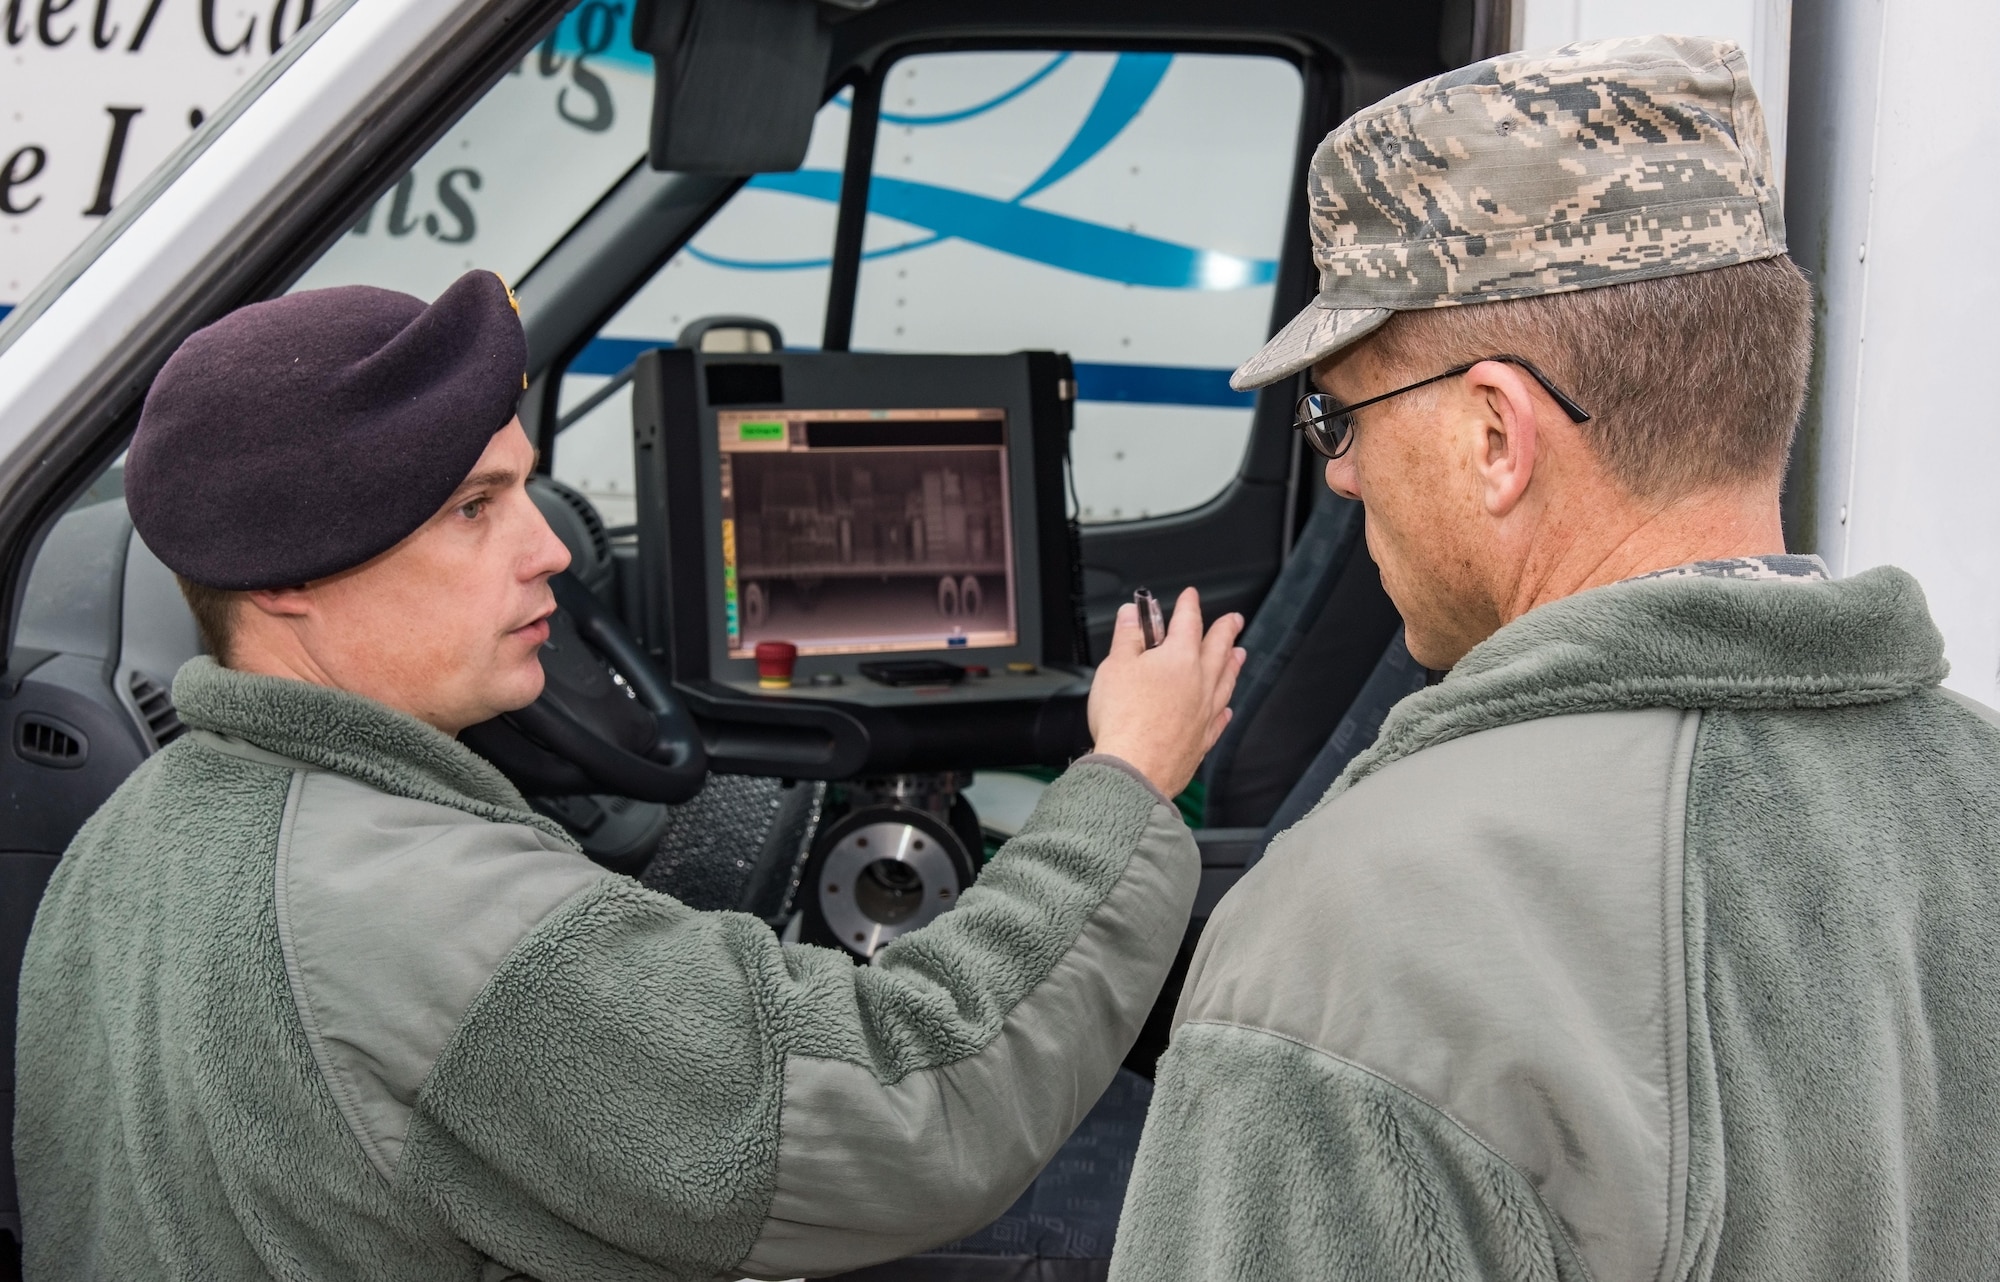 Tech. Sgt. Caleb Ferguson, 436th Security Forces Squadron commercial vehicle inspection gate NCO in charge, shows a saved X-ray of a vehicle to Brig. Gen. Steven Bleymaier, Director of Logistics, Engineering and Force Protection, Headquarters Air Mobility Command, Scott Air Force Base, Ill., Nov. 30, 2017, on Dover Air Force Base, Del. The Backscatter van can X-ray vehicles prior to them entering the Commercial Vehicle Inspection Facility, located near the South Gate. (U.S. Air Force photo by Roland Balik)